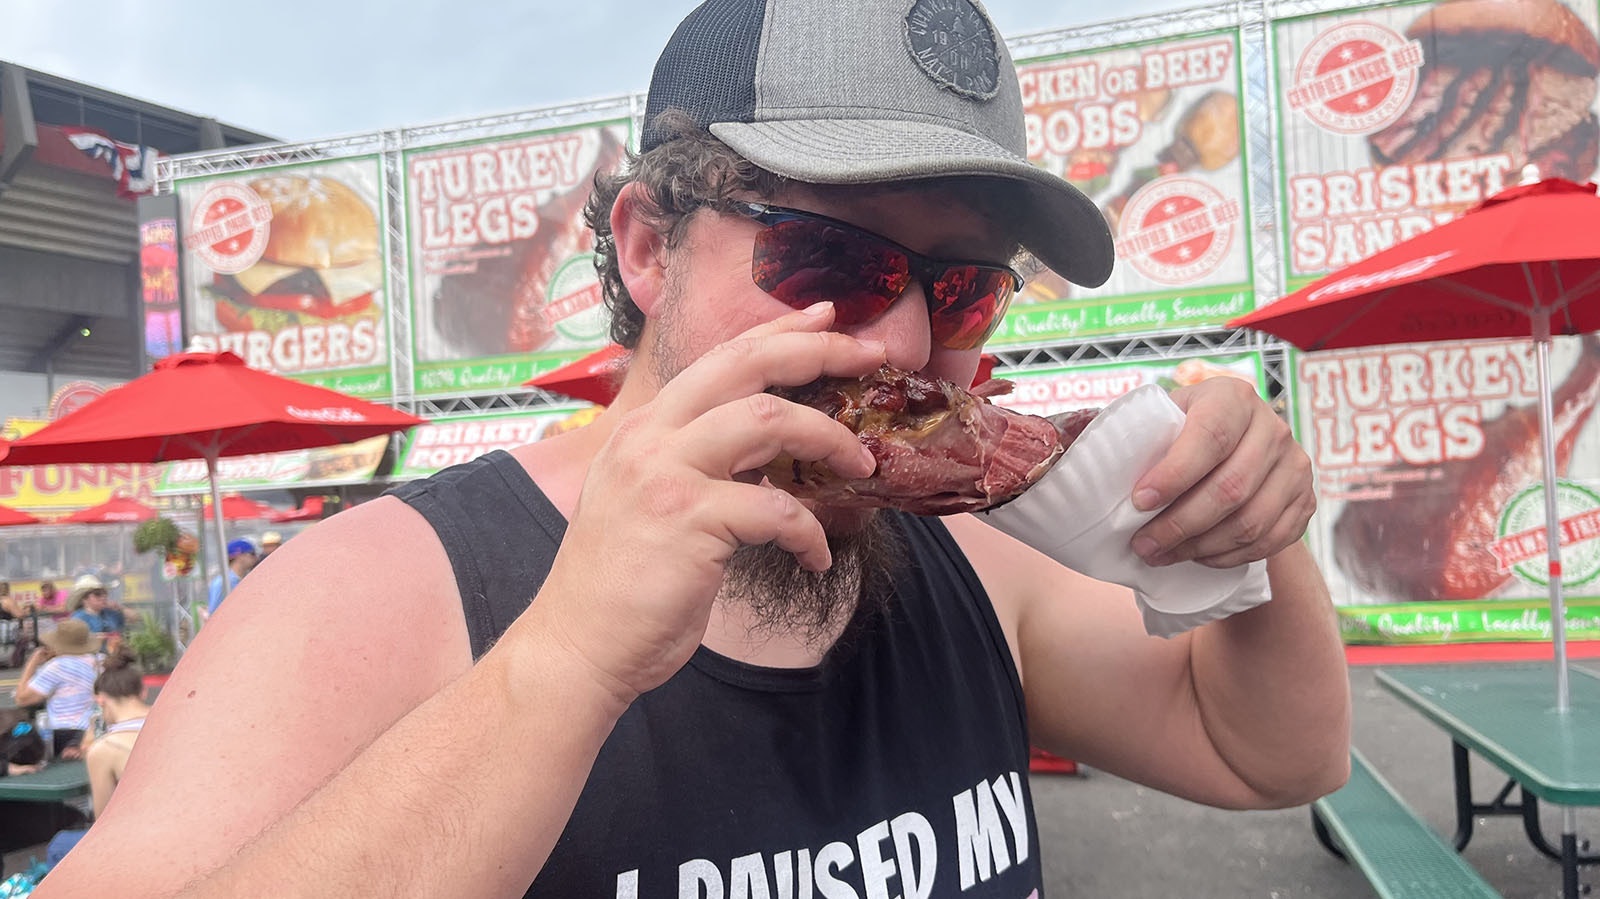 Maryland resident Charles Zentgraft bites into a $20 turkey leg at Cheyenne Frontier Days on Thursday. He said the leg was overpriced, and rated it a 7 out of 10 for taste.